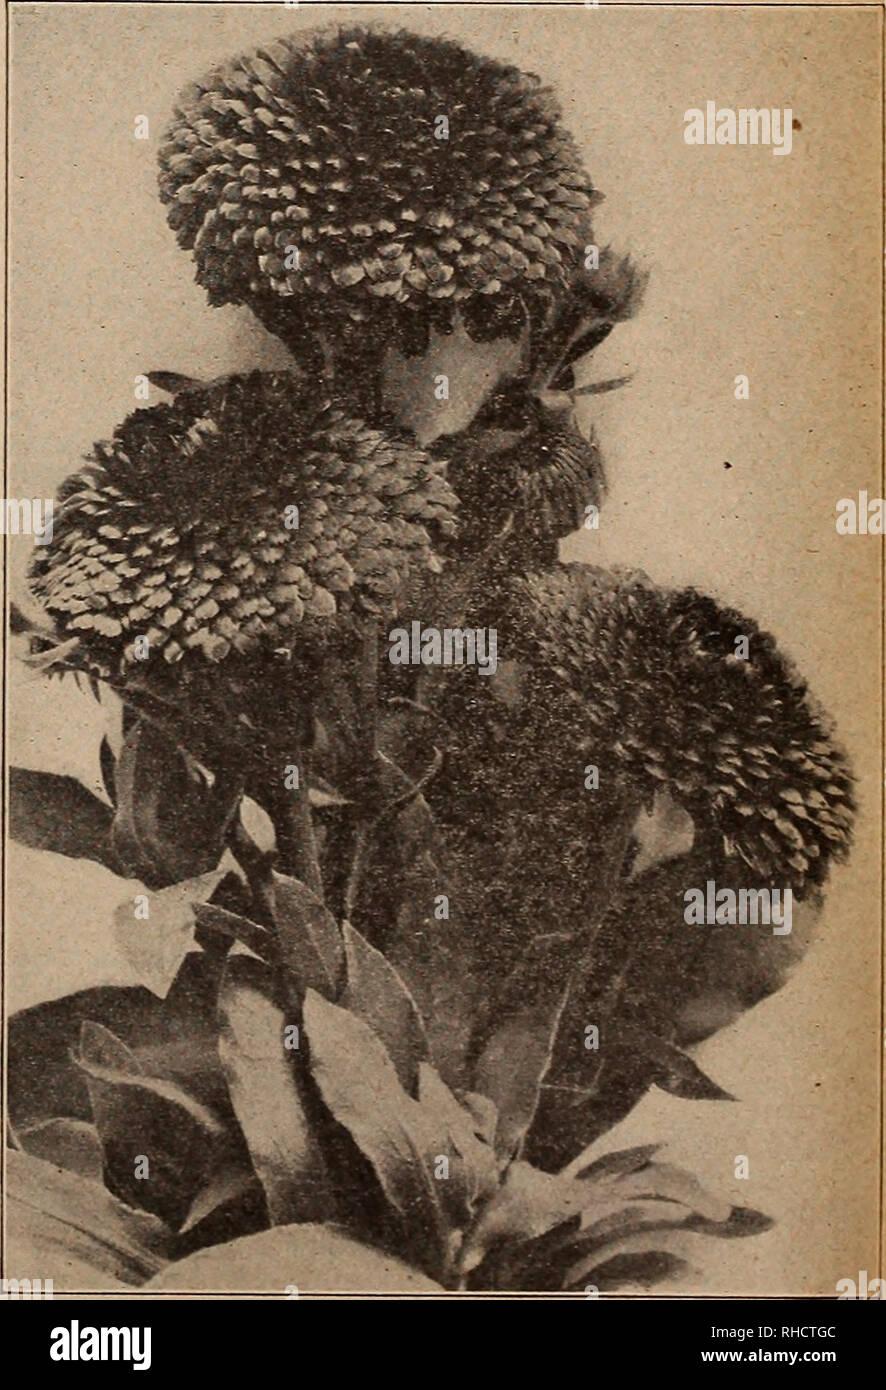 . Book for florists. Flowers Seeds Catalogs; Bulbs (Plants) Seedlings Catalogs; Trees Seeds Catalogs; Horticulture Equipment and supplies Catalogs. ASPARAGUS Plumosus Nanus Lath House Grown Seed ready in March, 1,000 seeds, $2.00; 5,000 seeds, $9.00. Write for prices on larger lots. Asparagus Falcatus. Valuable bushy green for cutting pur- poses. Shiny dark-green leaflets. 100 seeds, $1.00; 1,000 seeds, $8.00. Asparagus Scandens Deflexus. 100 seeds, 75c; 1,000 seeds, $6.00. Asparagus Sprengeri. 100 seeds, 25c; 250 seeds, 35c; 1,000 seeds, $1.00; 5,000 seeds, $4.50; lb., $8.00. Asperula Azurea  Stock Photo